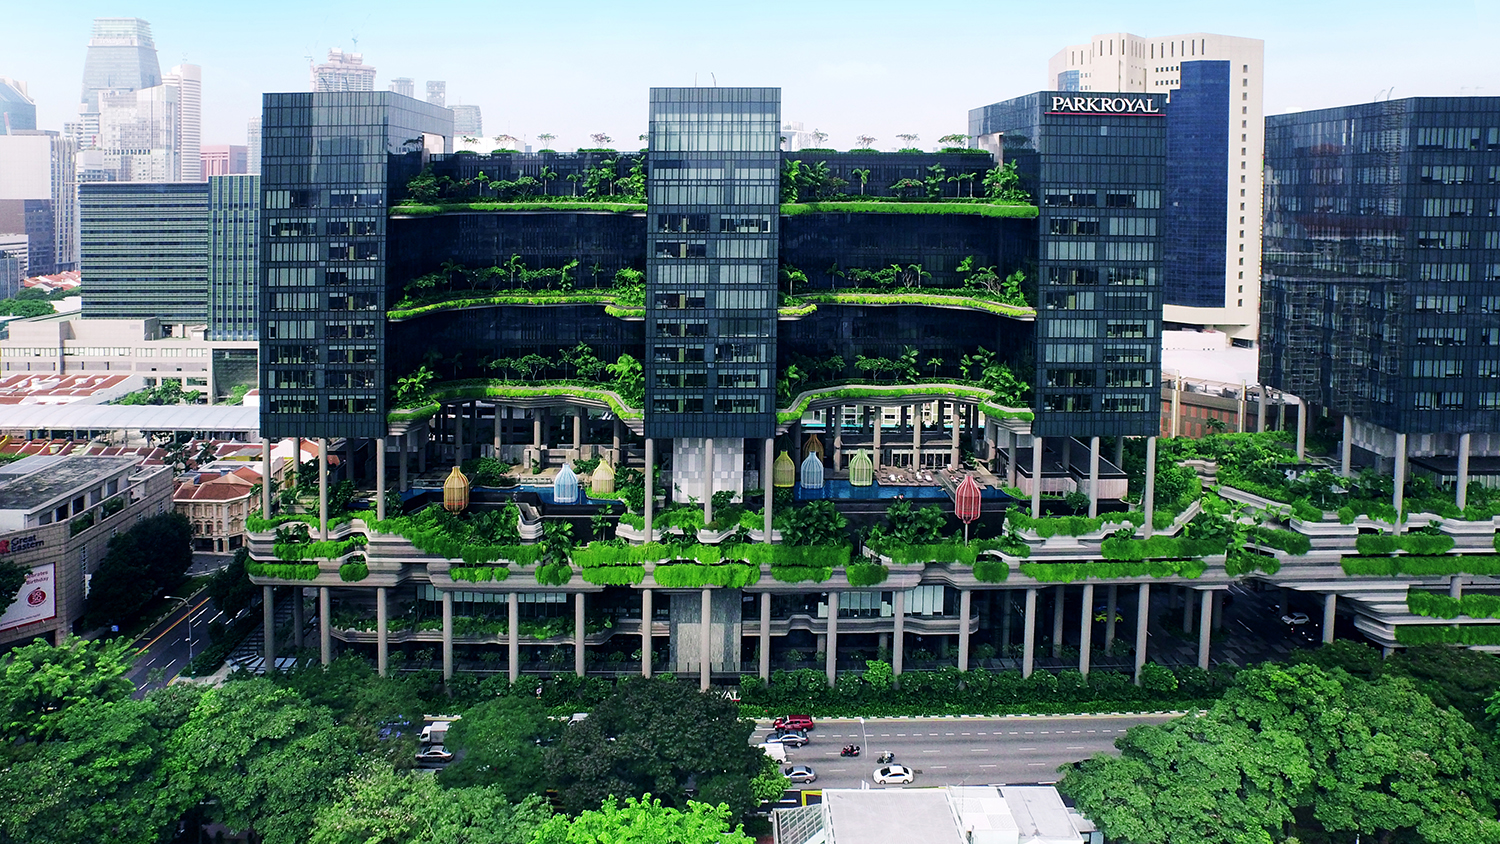 Site context with Hong Lim Park in forefront